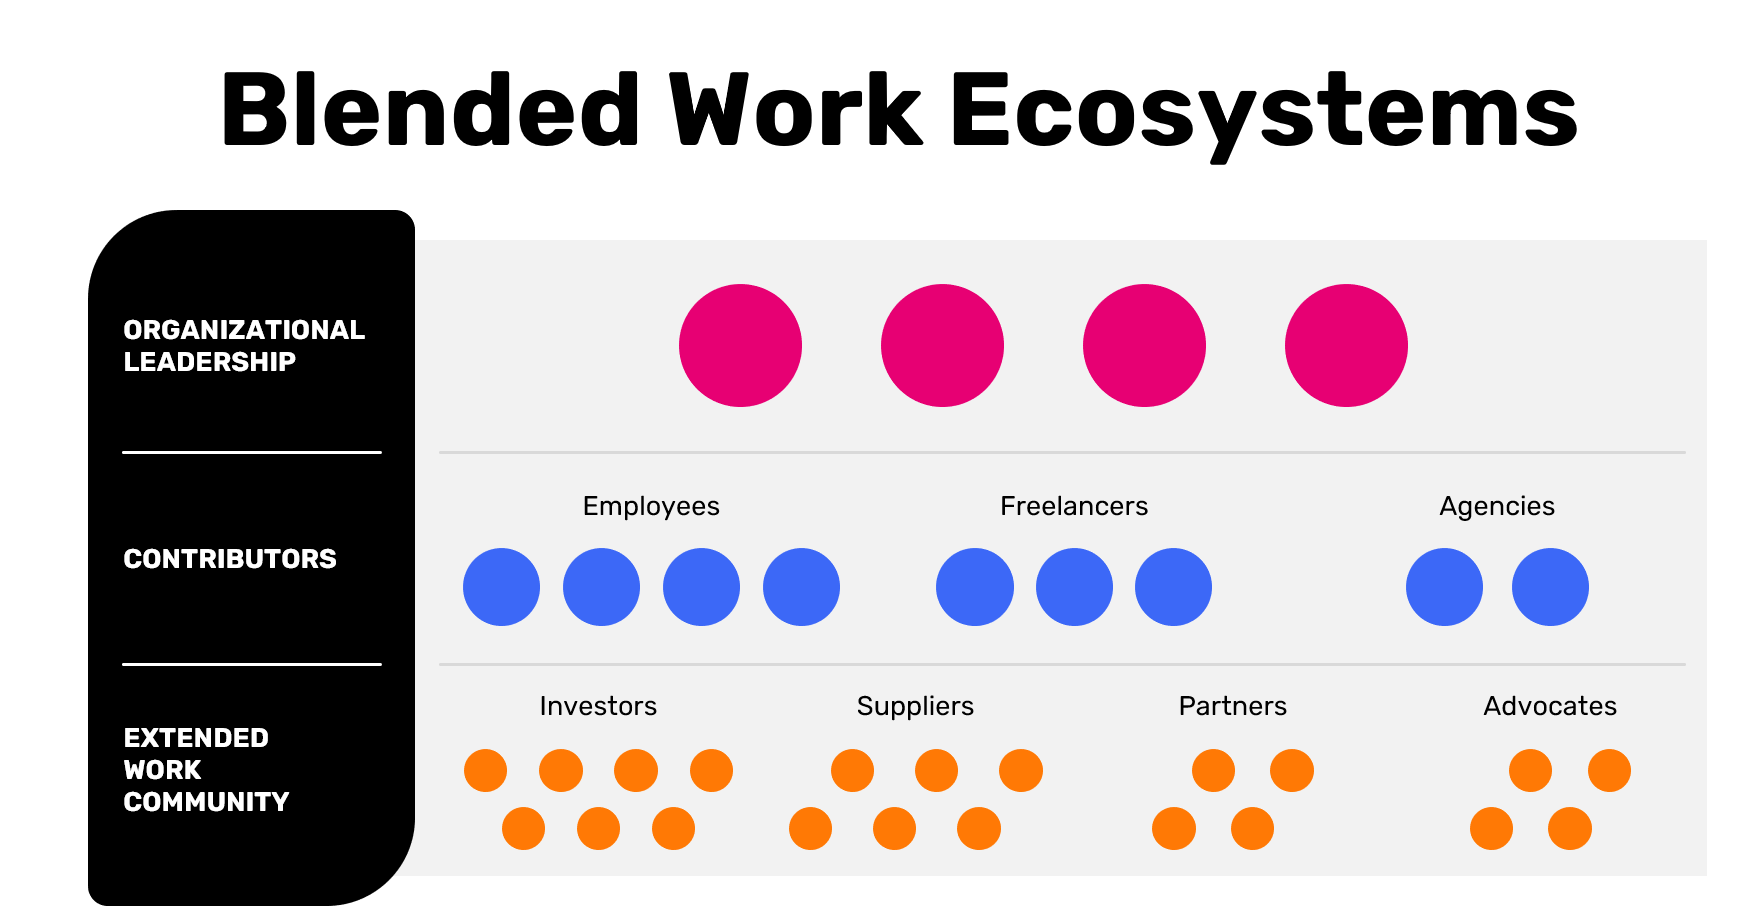 Blended Work Ecosystems